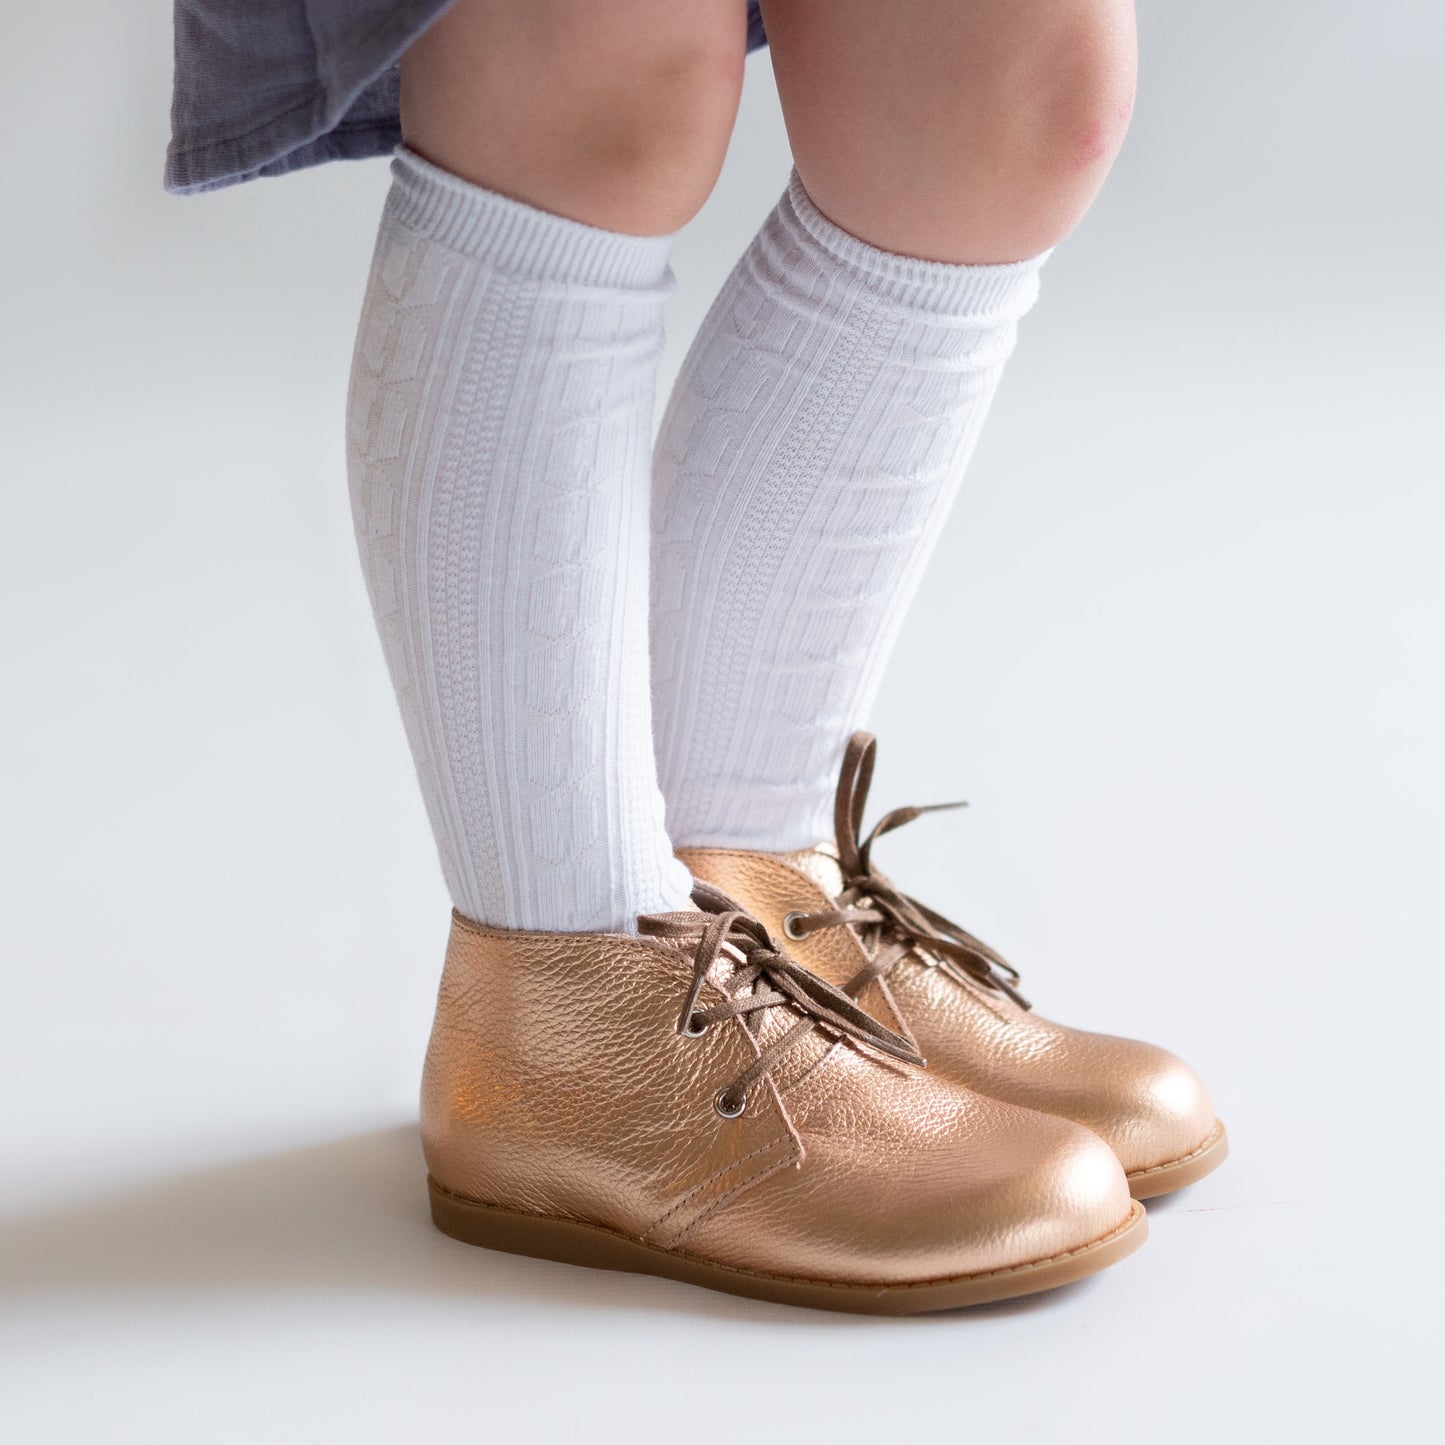 Cable Knit Knee High Socks in White  - Doodlebug's Children's Boutique